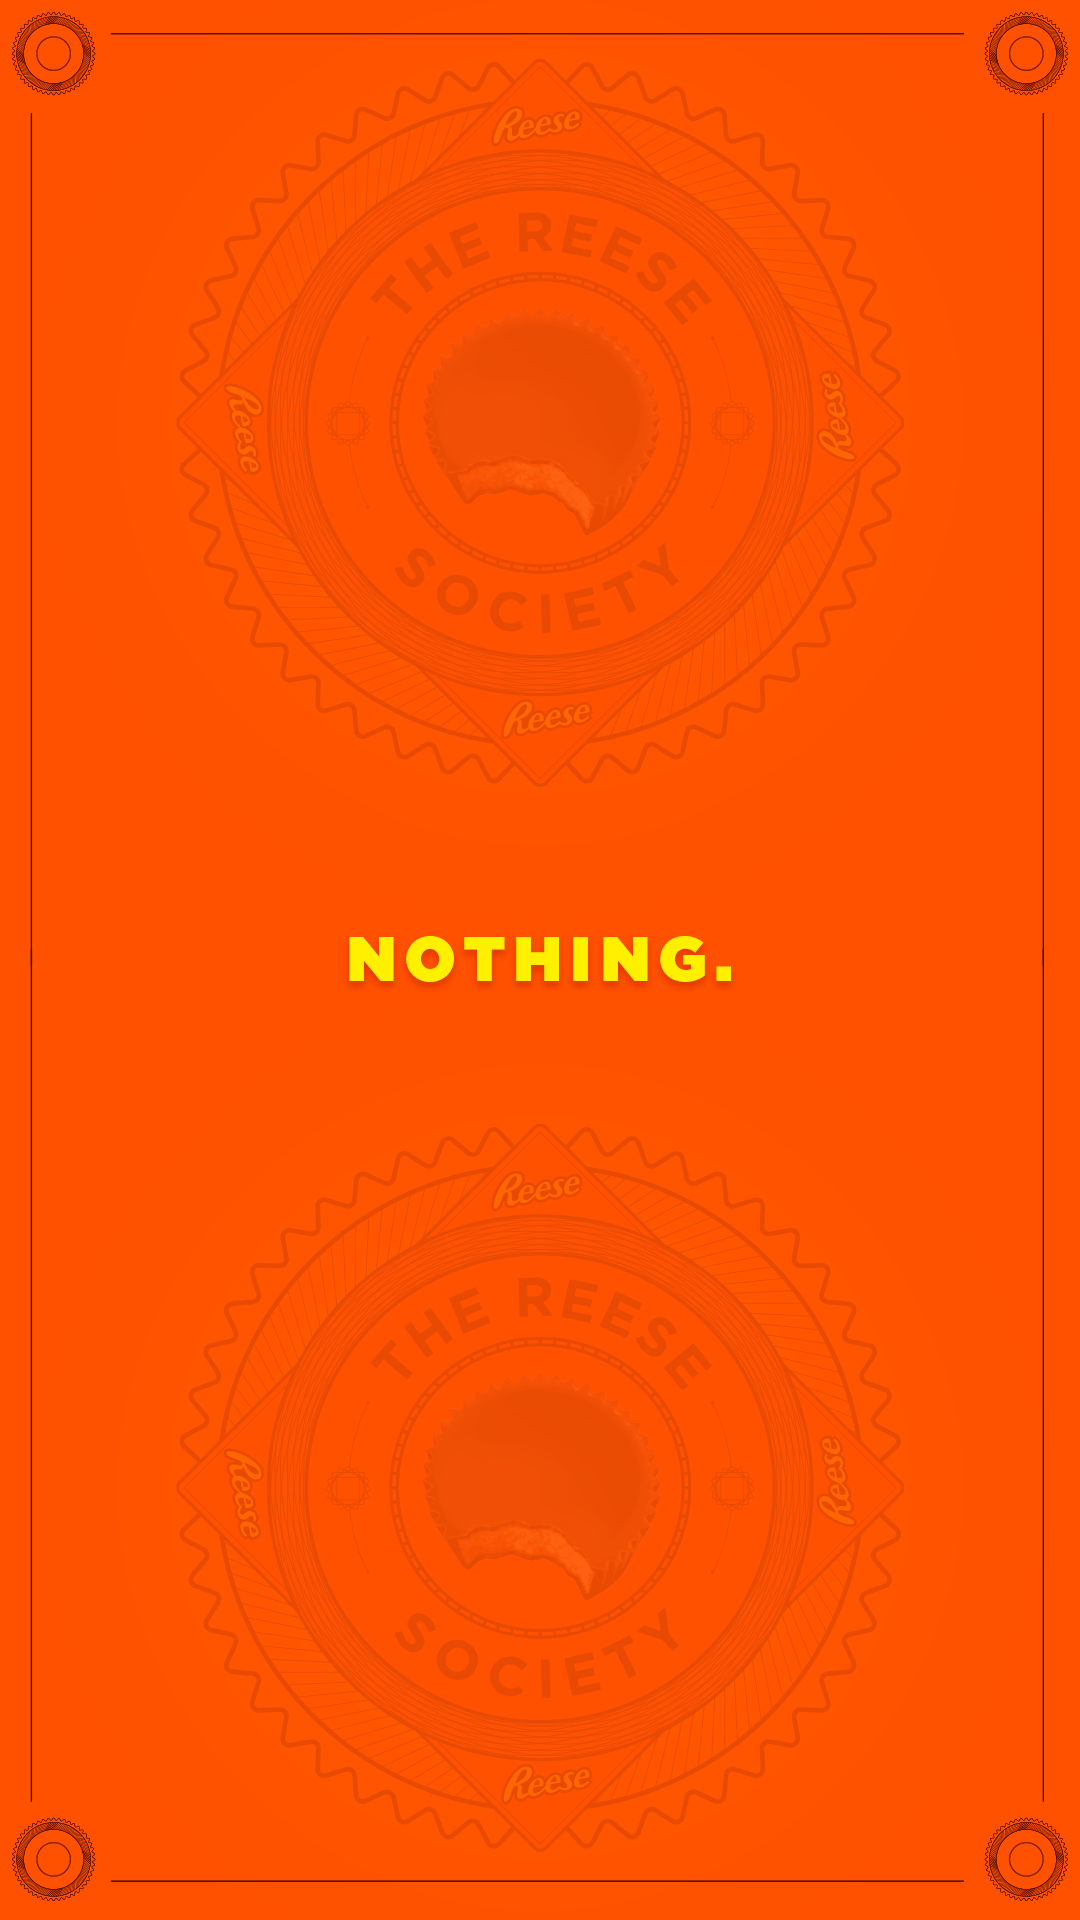 Reese-Society-IG_0015_Nothing.png